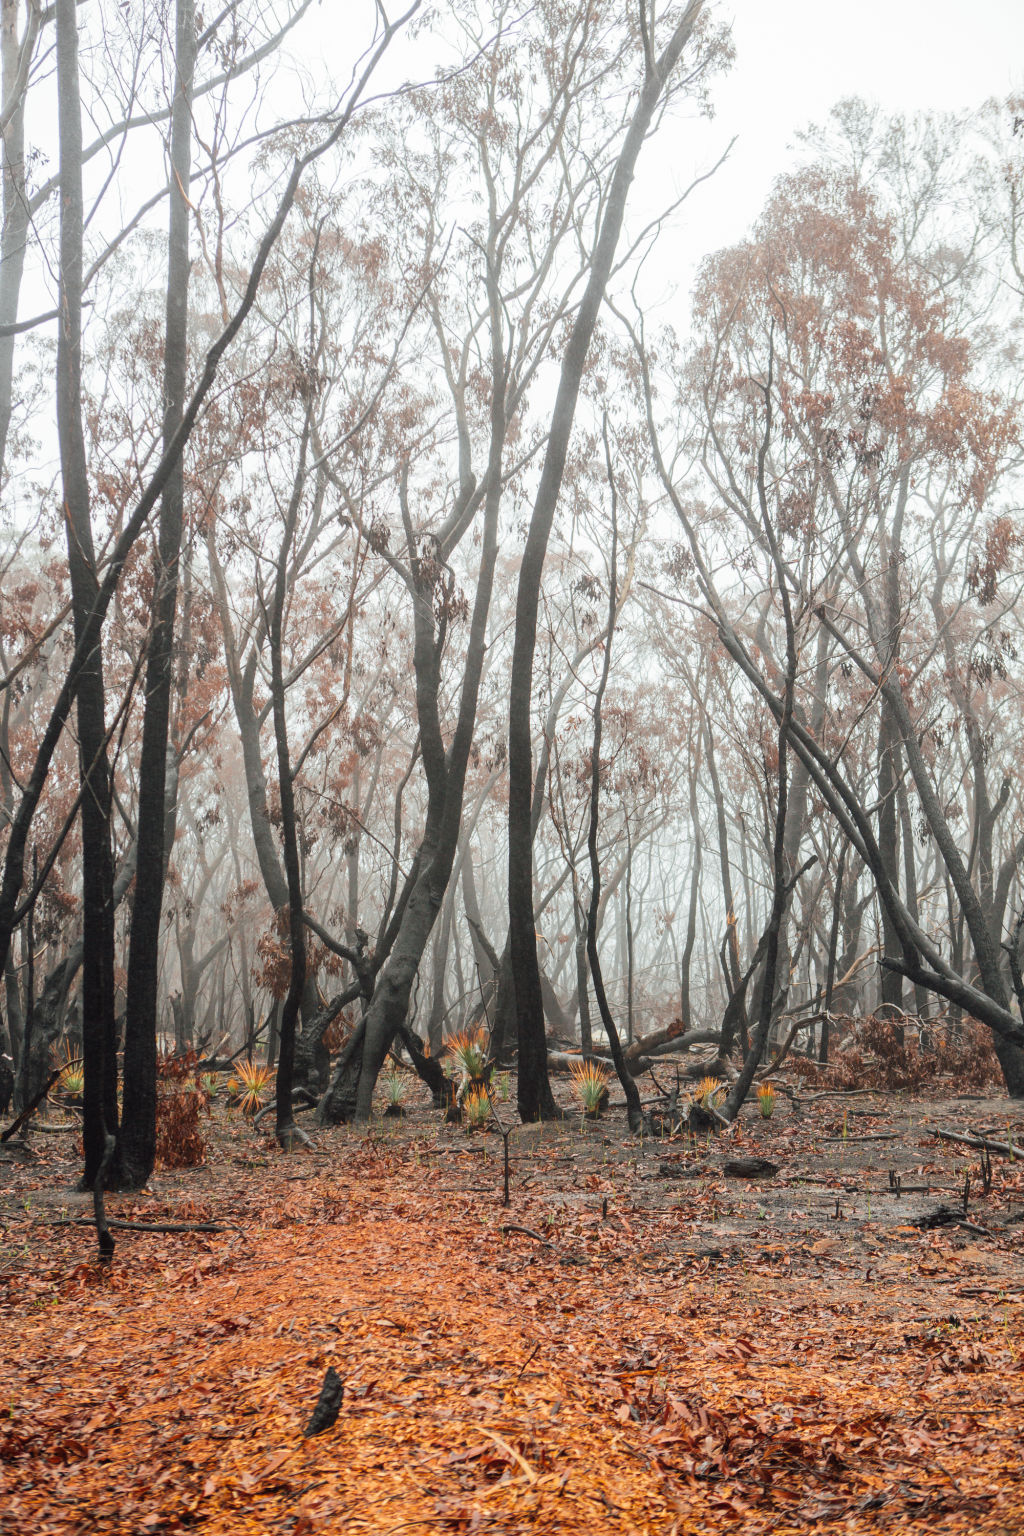 The bushfires burned through much of Victoria and NSW including the Blue Mountains, pictured. Photo: Helena Dolby